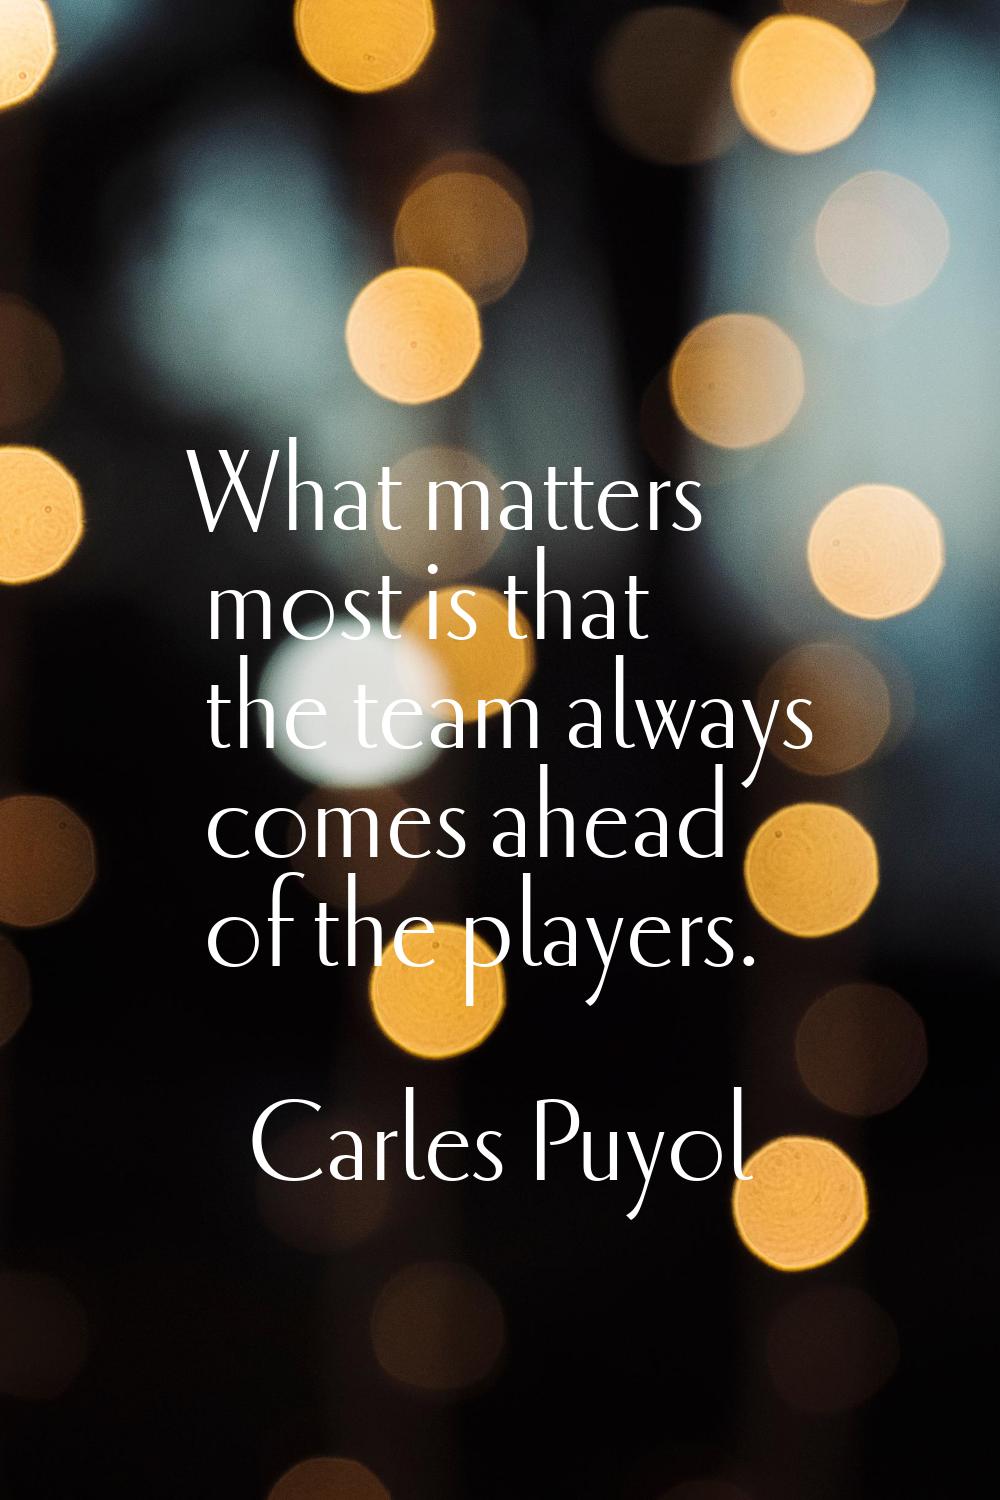 What matters most is that the team always comes ahead of the players.